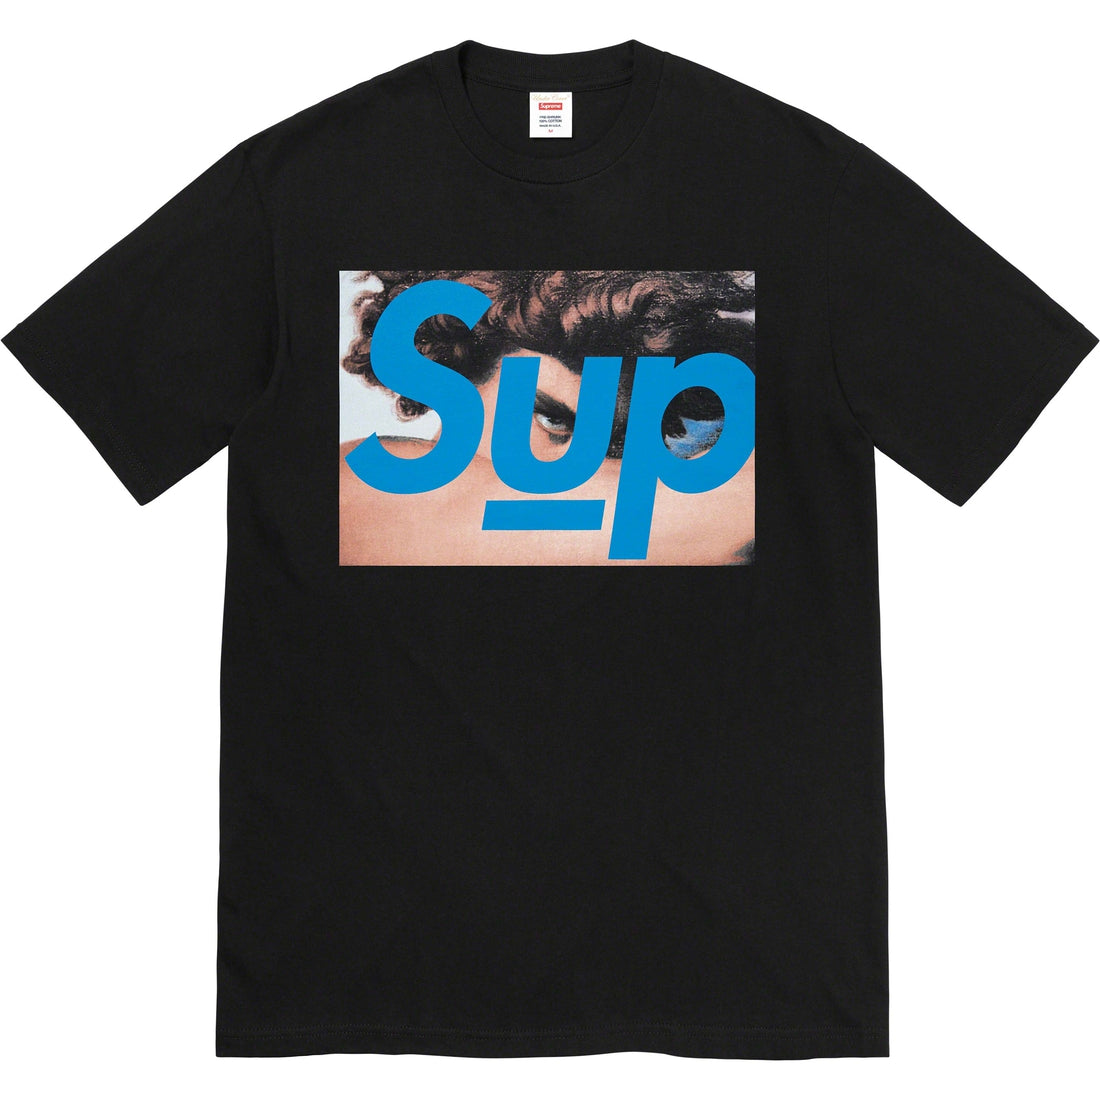 Supreme UNDERCOVER Face Tee - 澳門易購站mbuy. – mbuystore